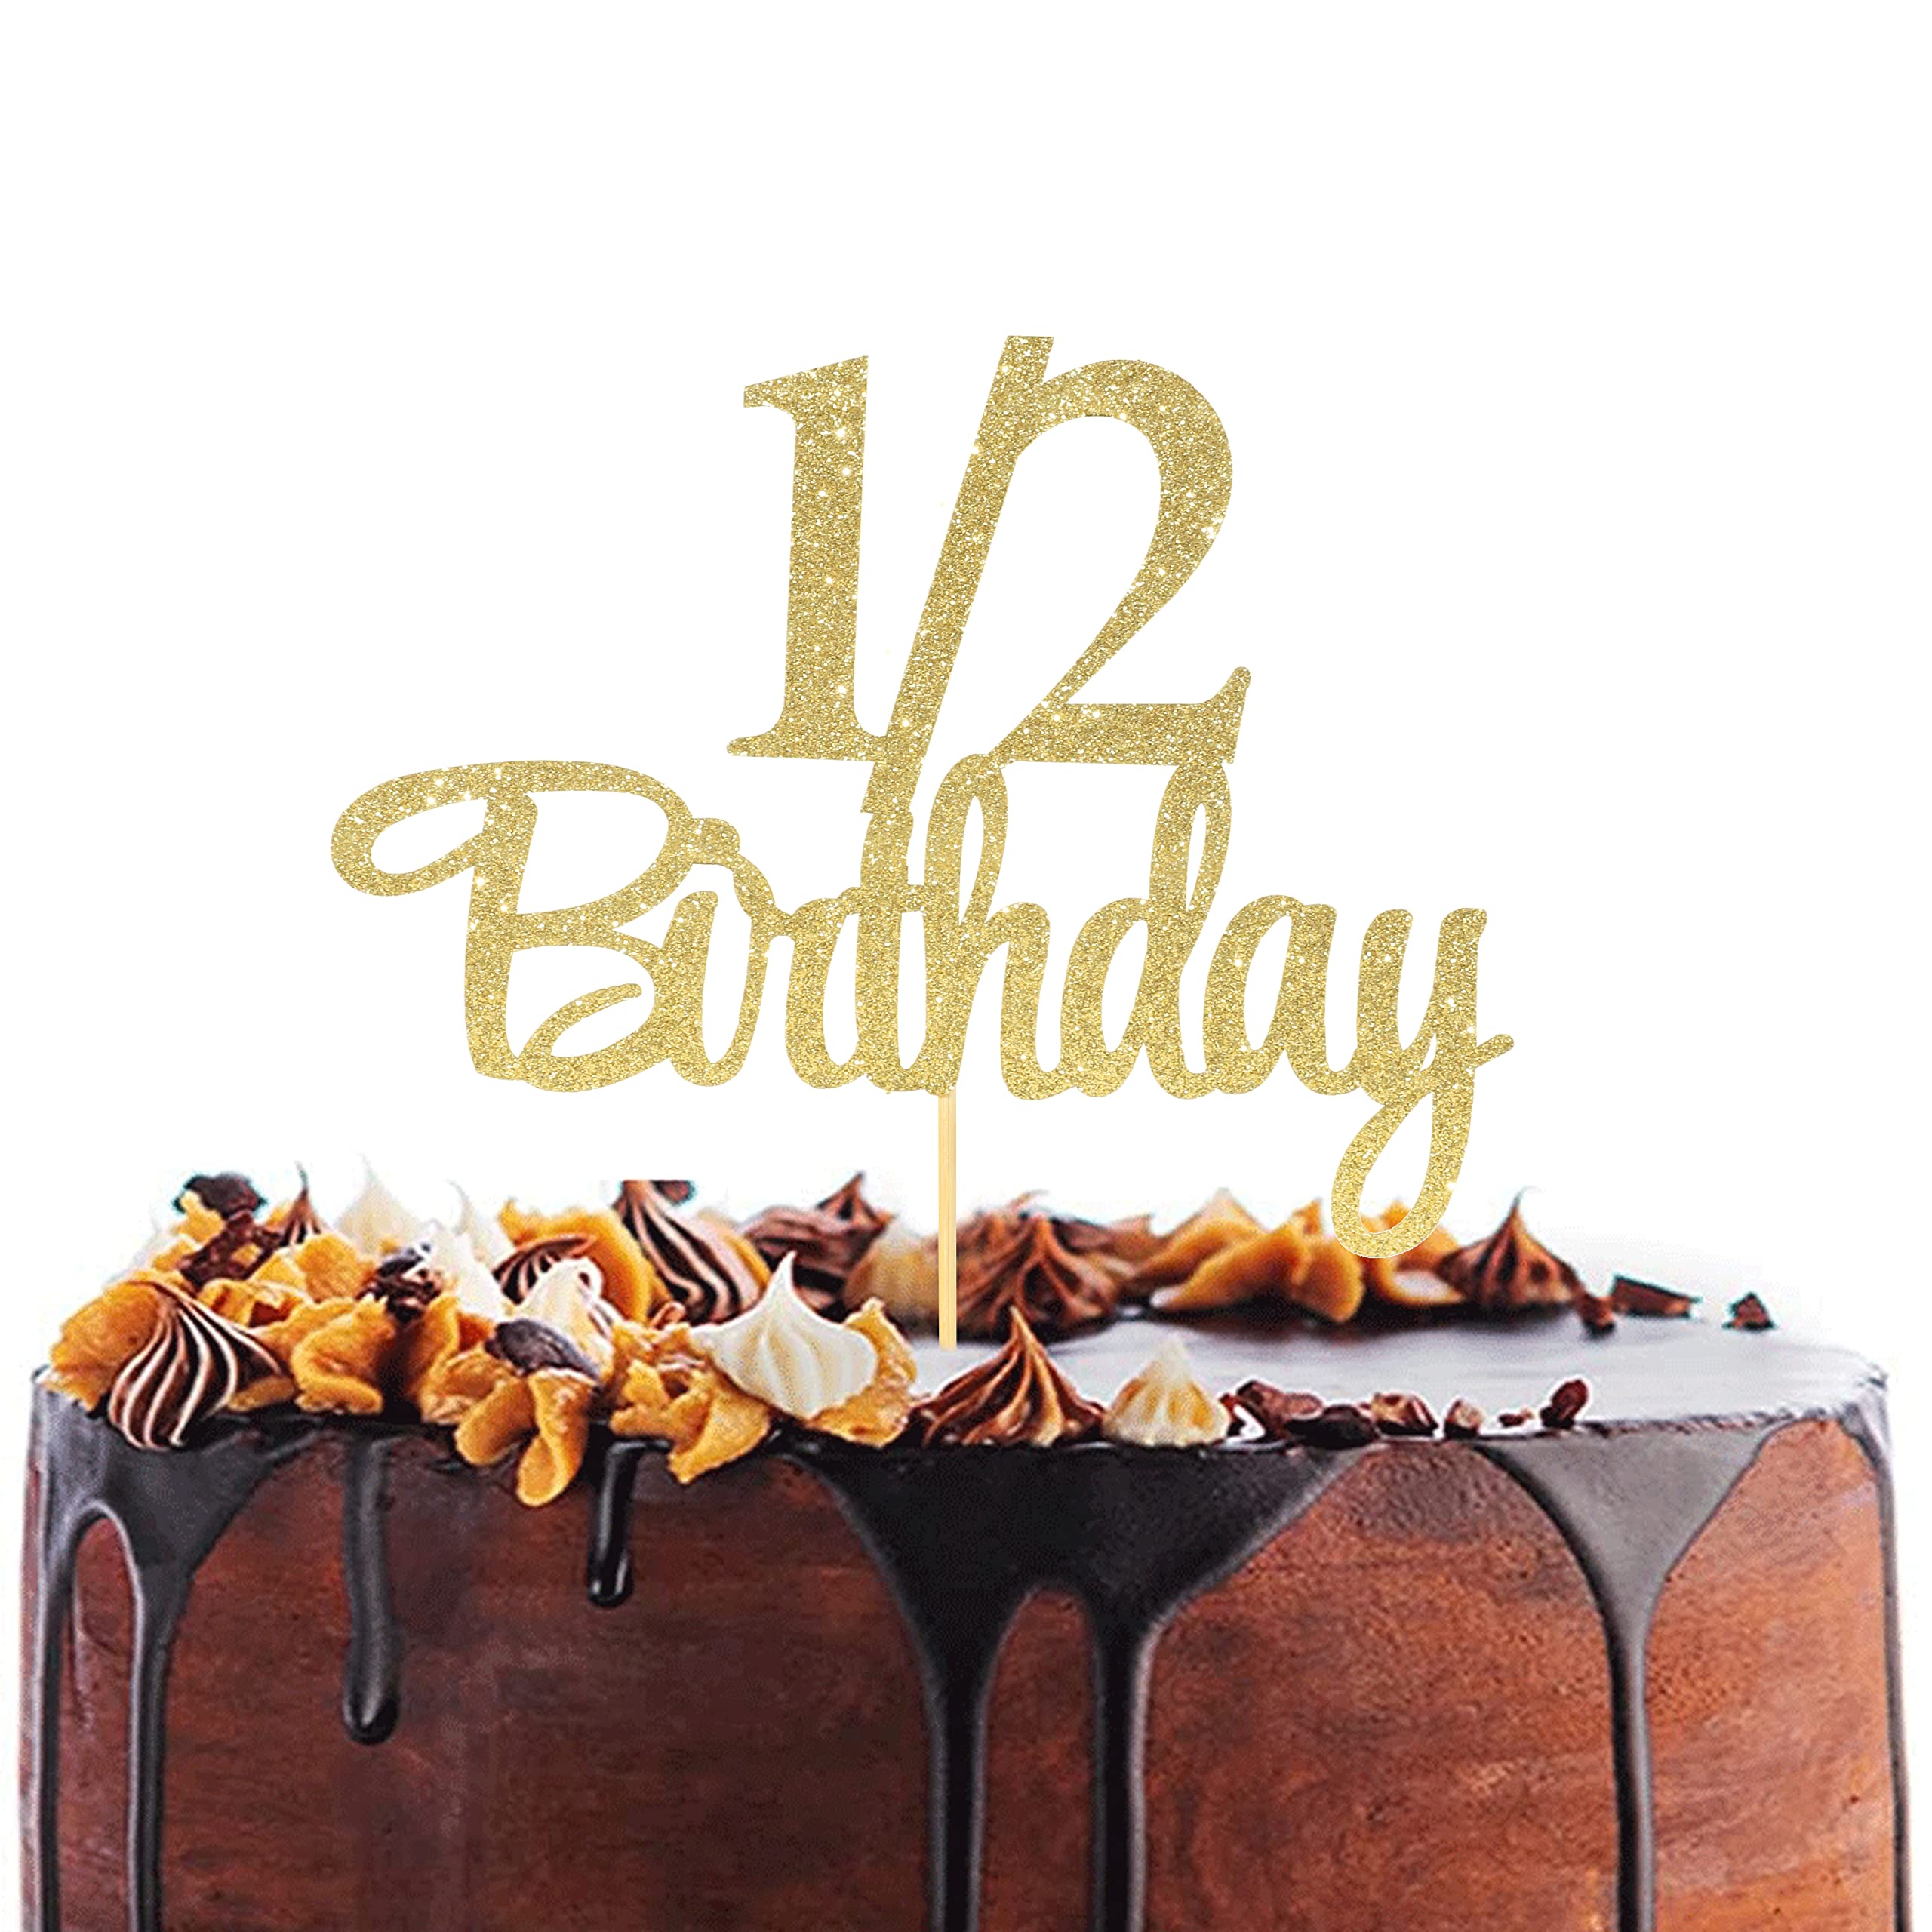 Send Cakes to USA Free Delivery | Birthday Cake Delivery to USA  |1800GiftPortal